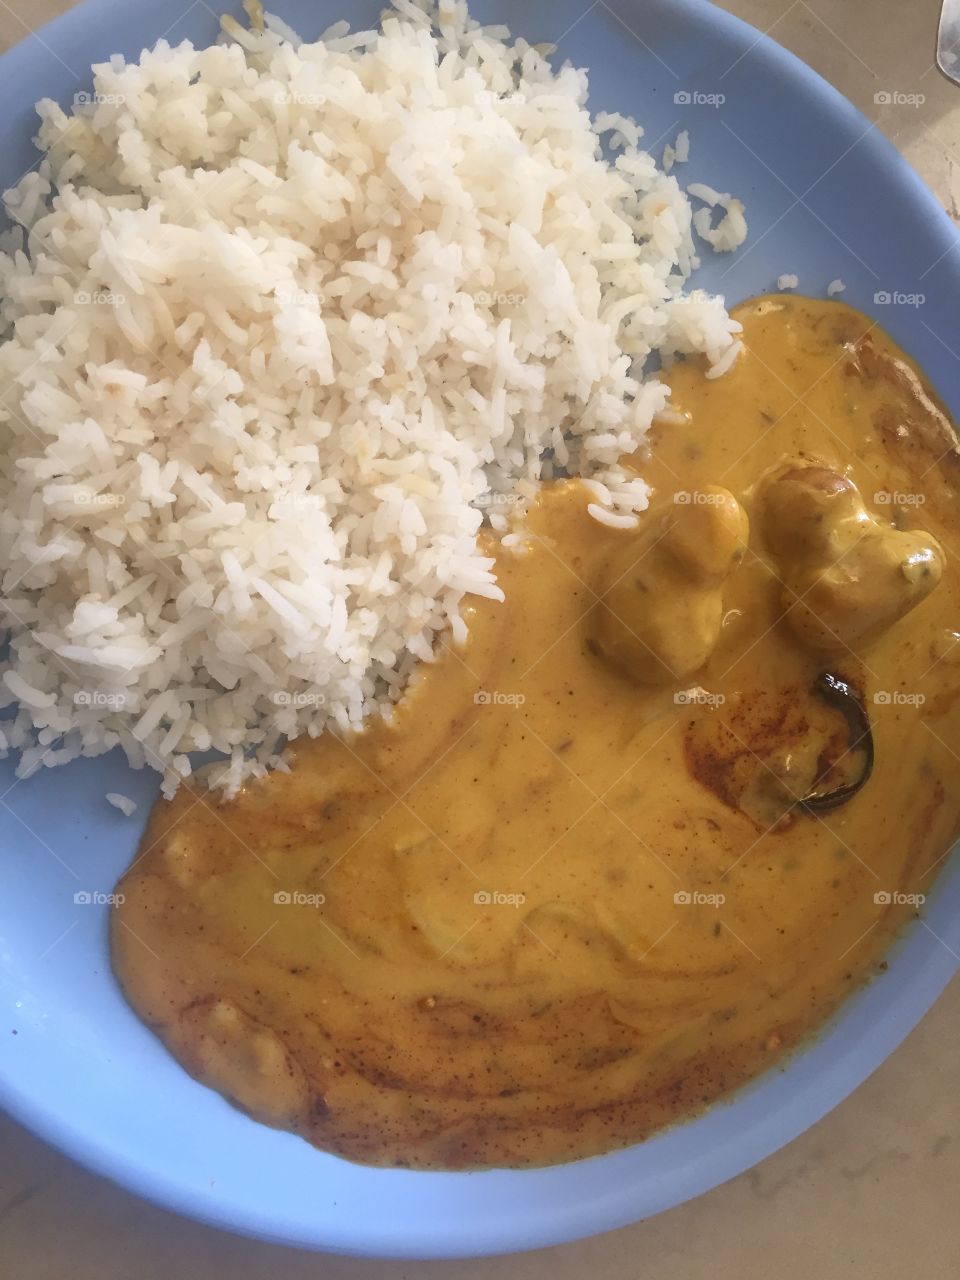 Curry rice by self-made 